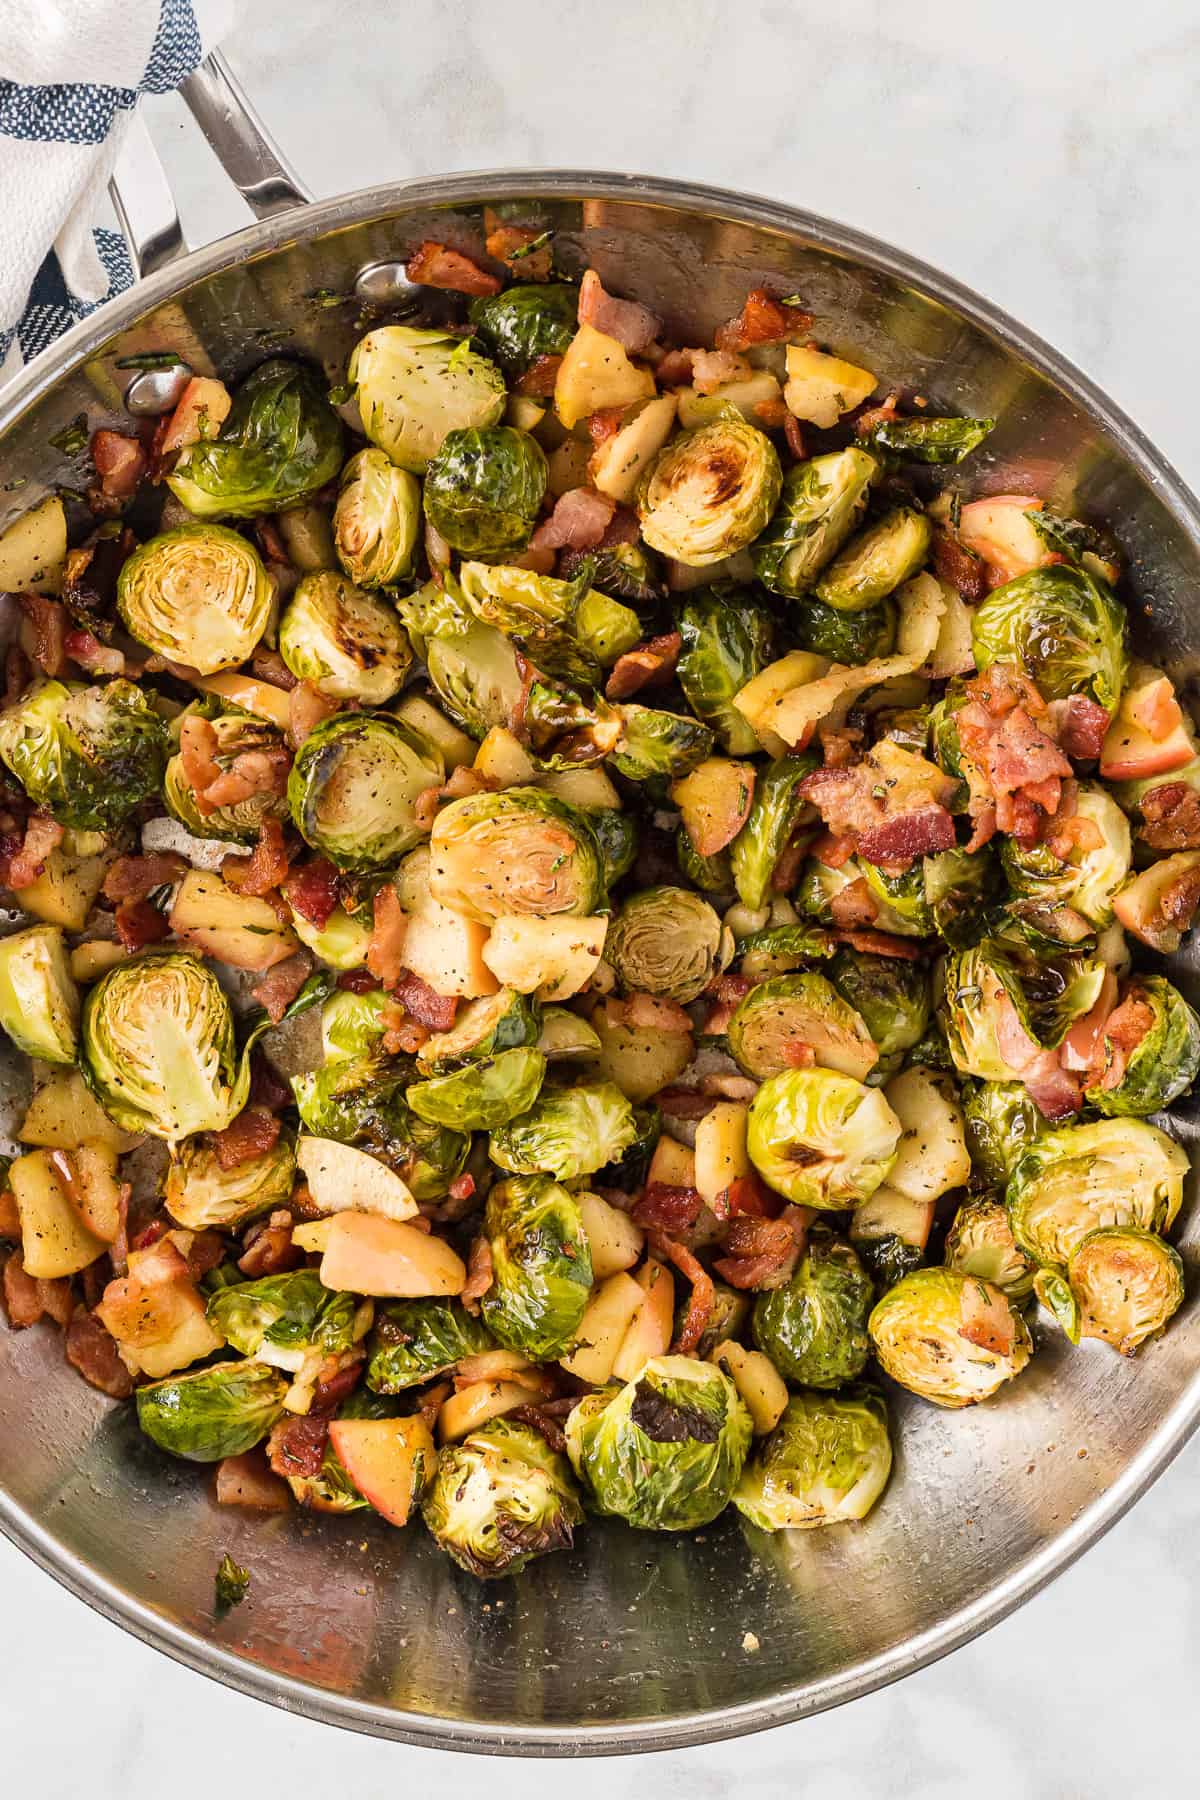 A large metal bowl filled with roasted brussels sprouts being tossed with crispy bacon and sauteed apples.